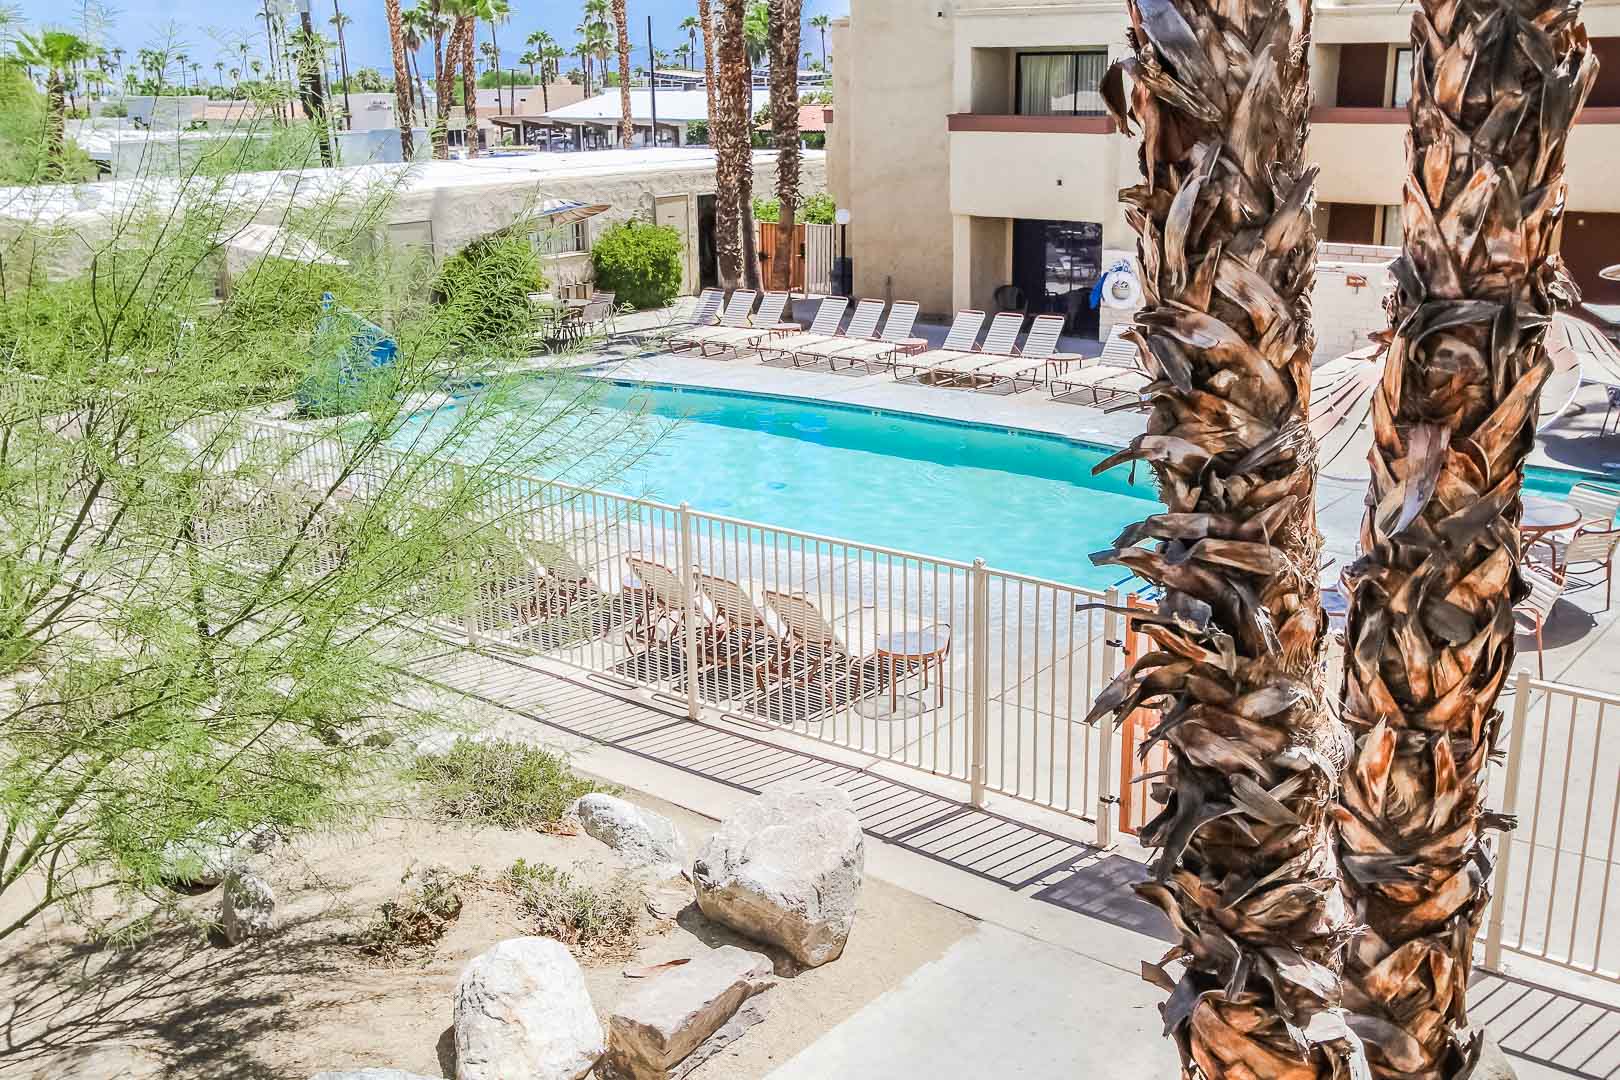 A clear and clean swimming pool at VRI's Desert Vacation Villas in Palm Springs California.